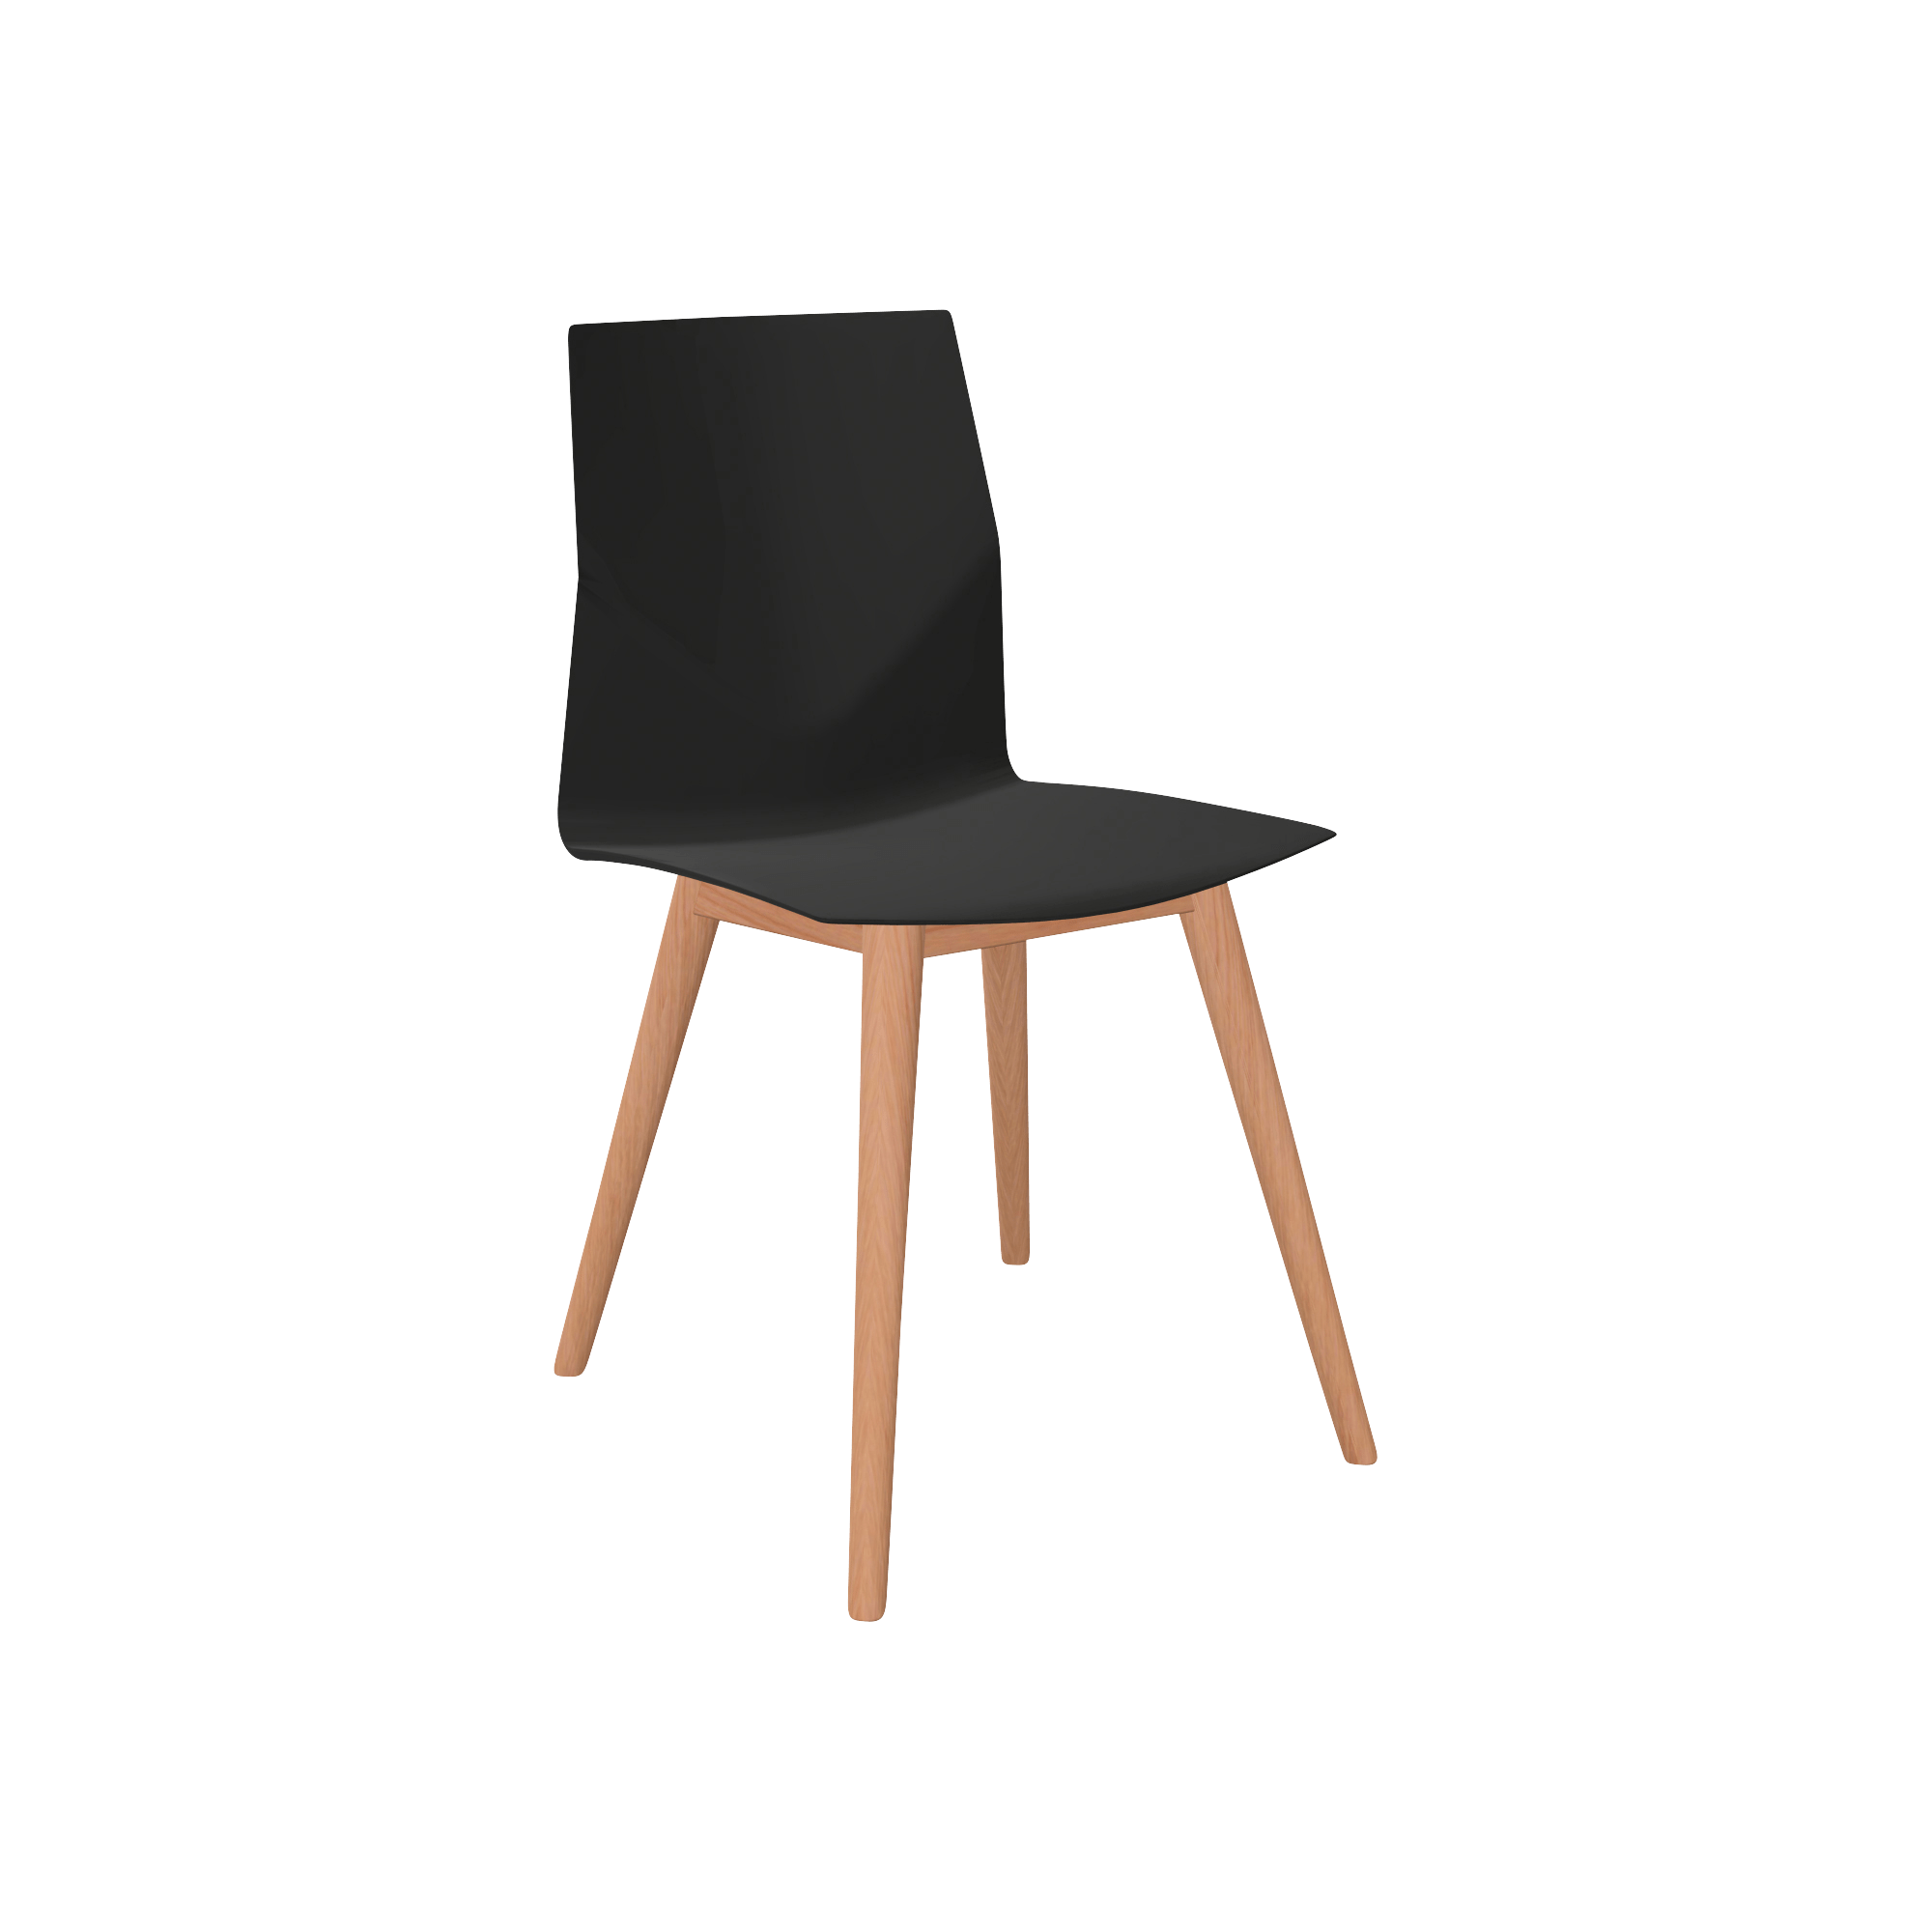 black chair with wooden legs